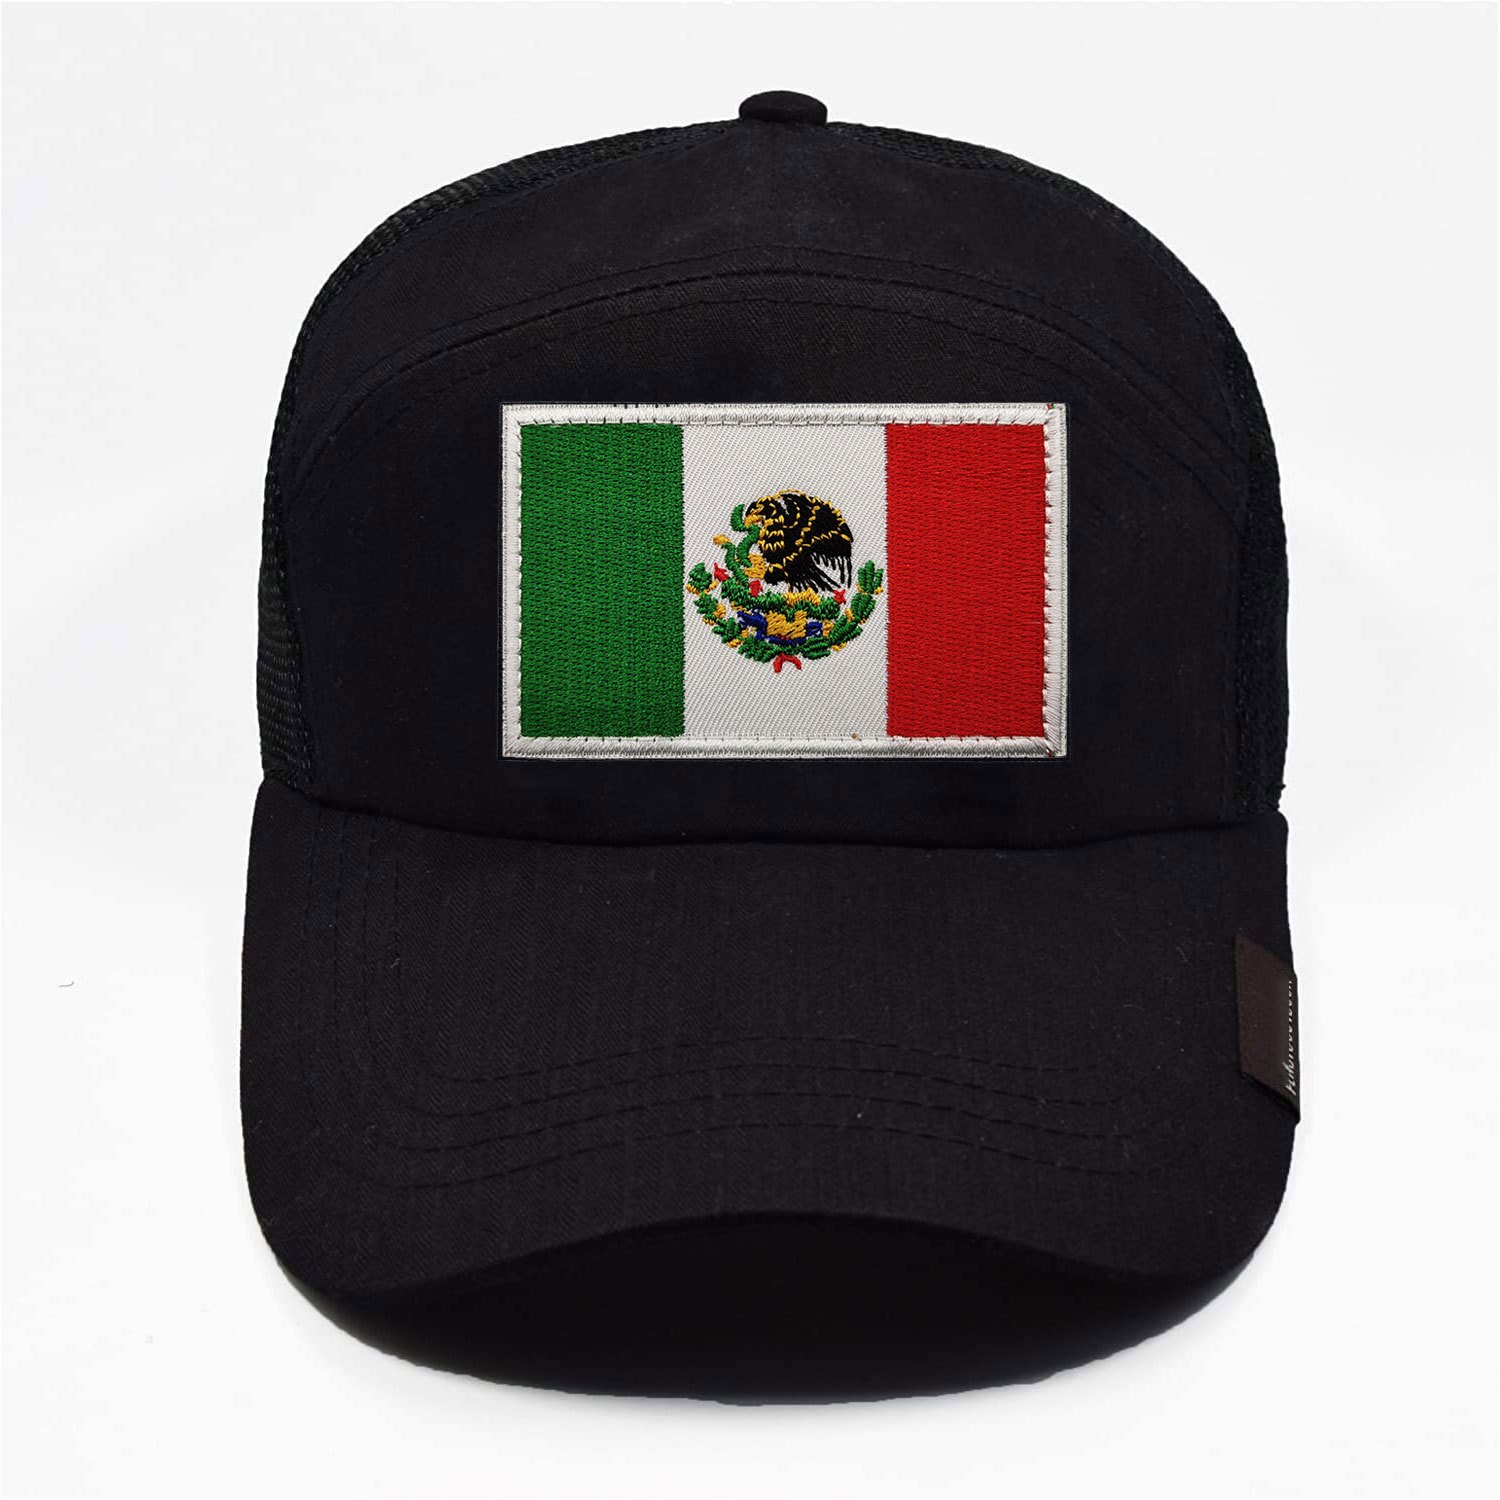 3Pack Mexico Flag Patch Mexican Flags Patchs, Mexico Tactical Flag  Embroidery Patch with, for Hats, Tactical Bags, Jackets, Clothes Patch Team  Military Patch